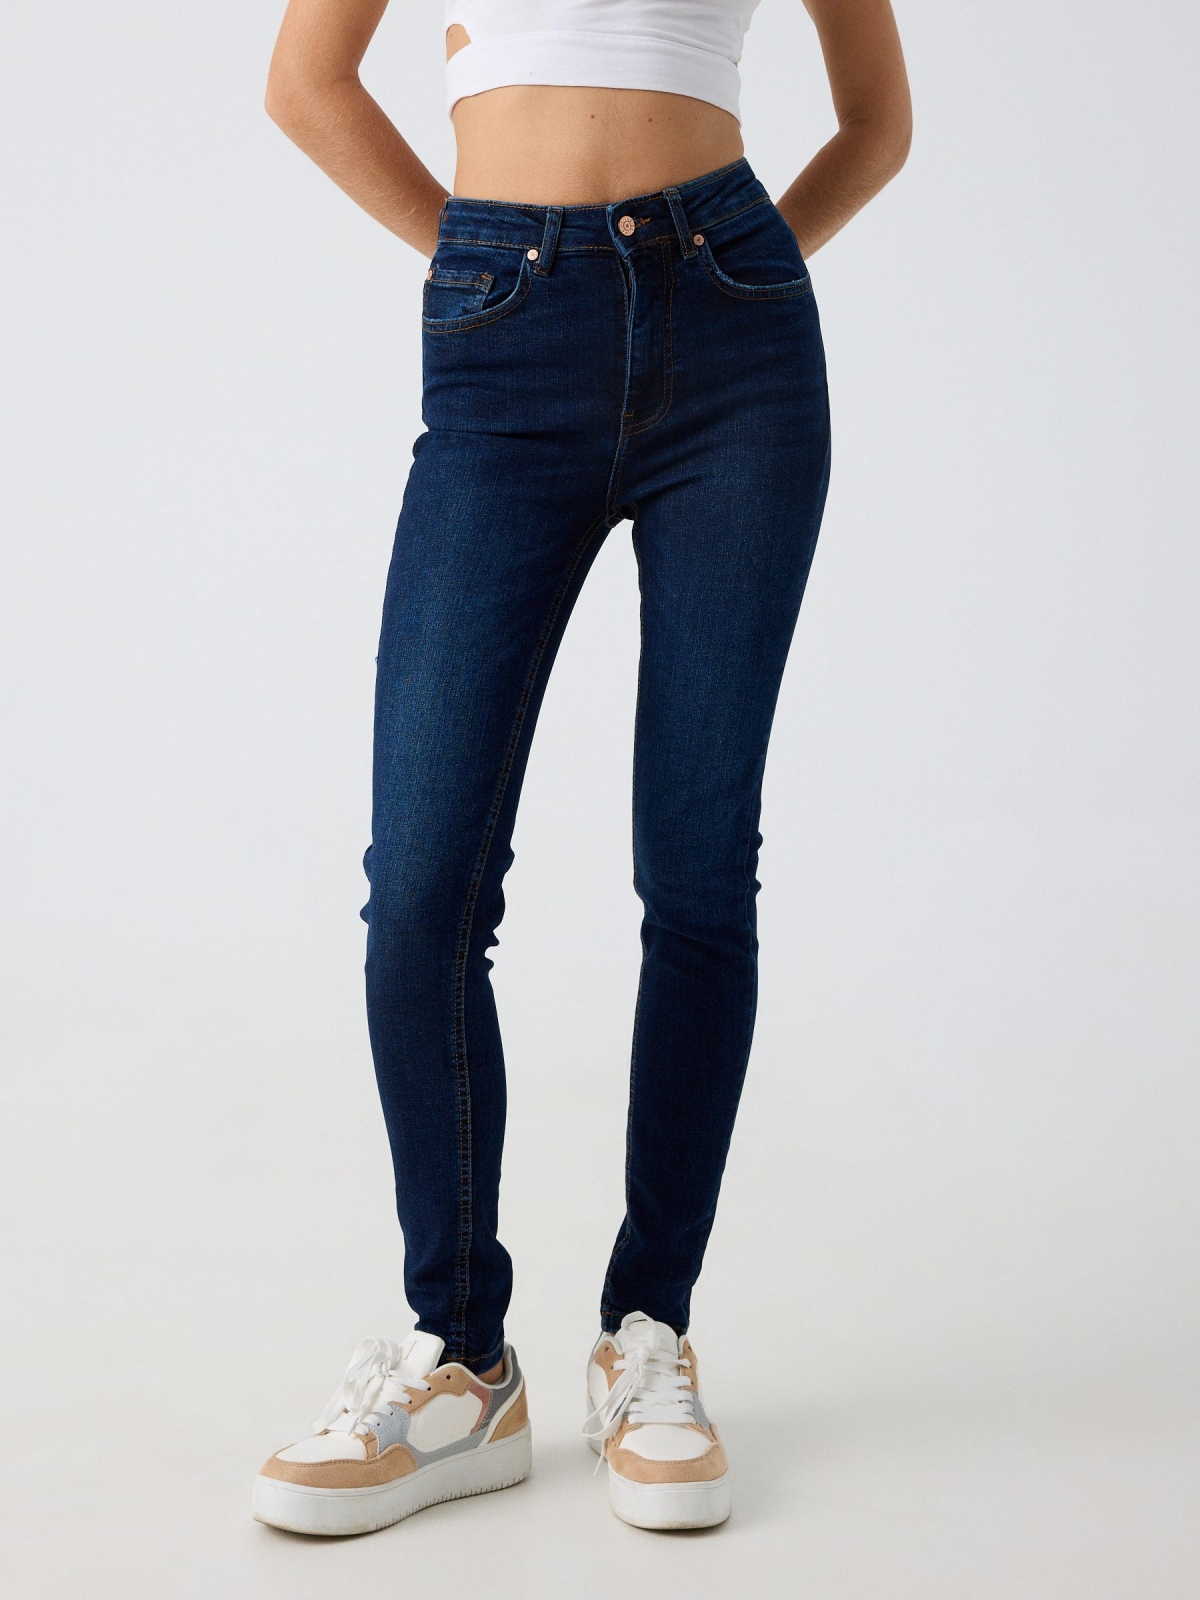 Blue high waisted skinny jeans blue middle front view